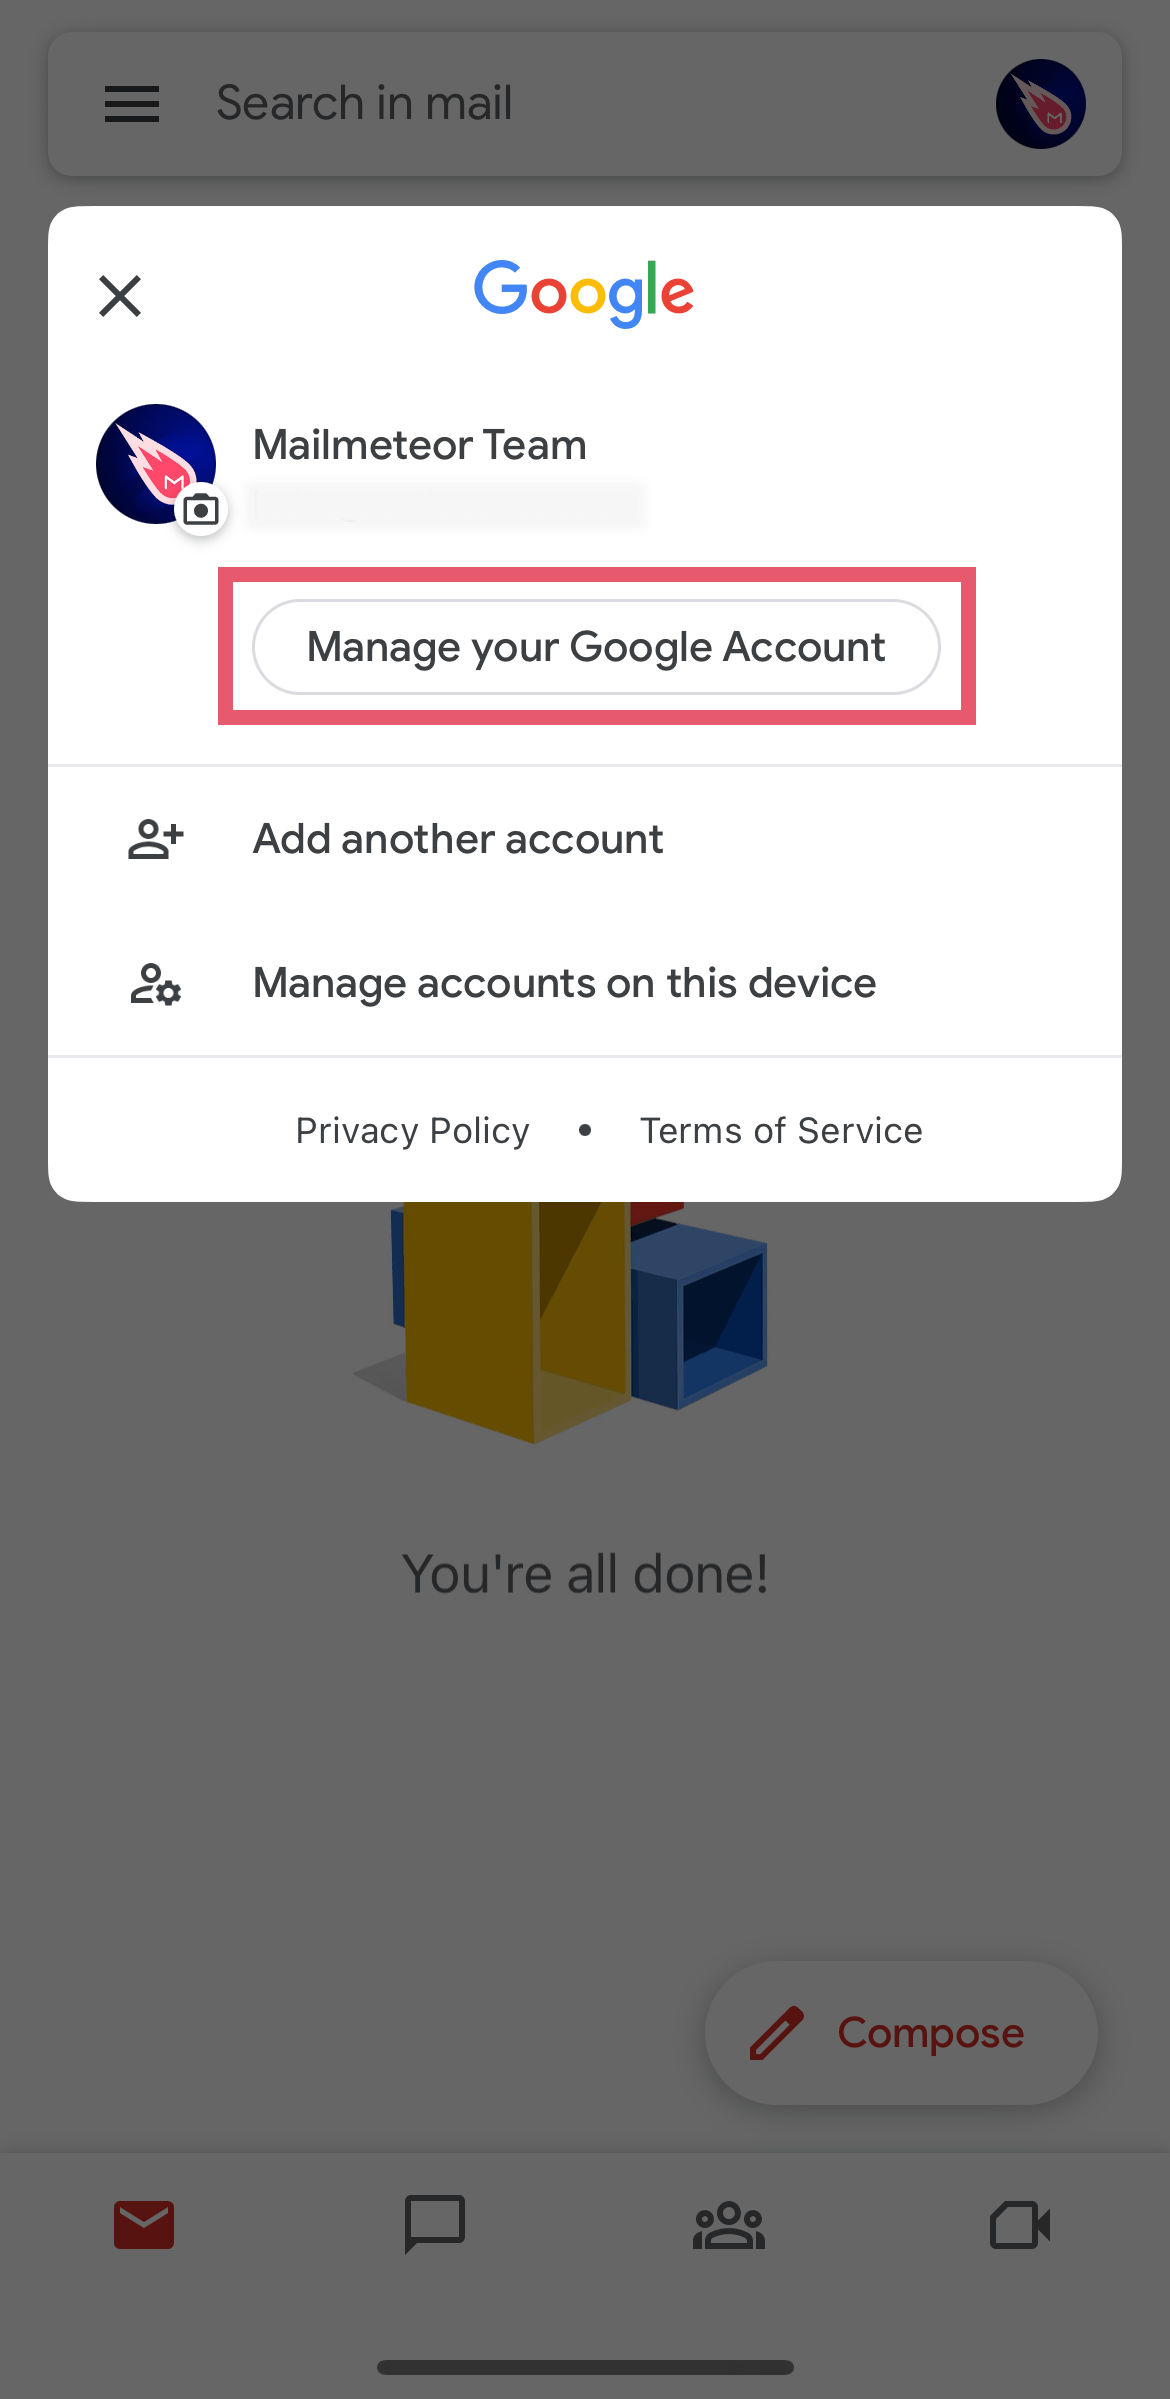 Manage account in the Gmail iPhone app